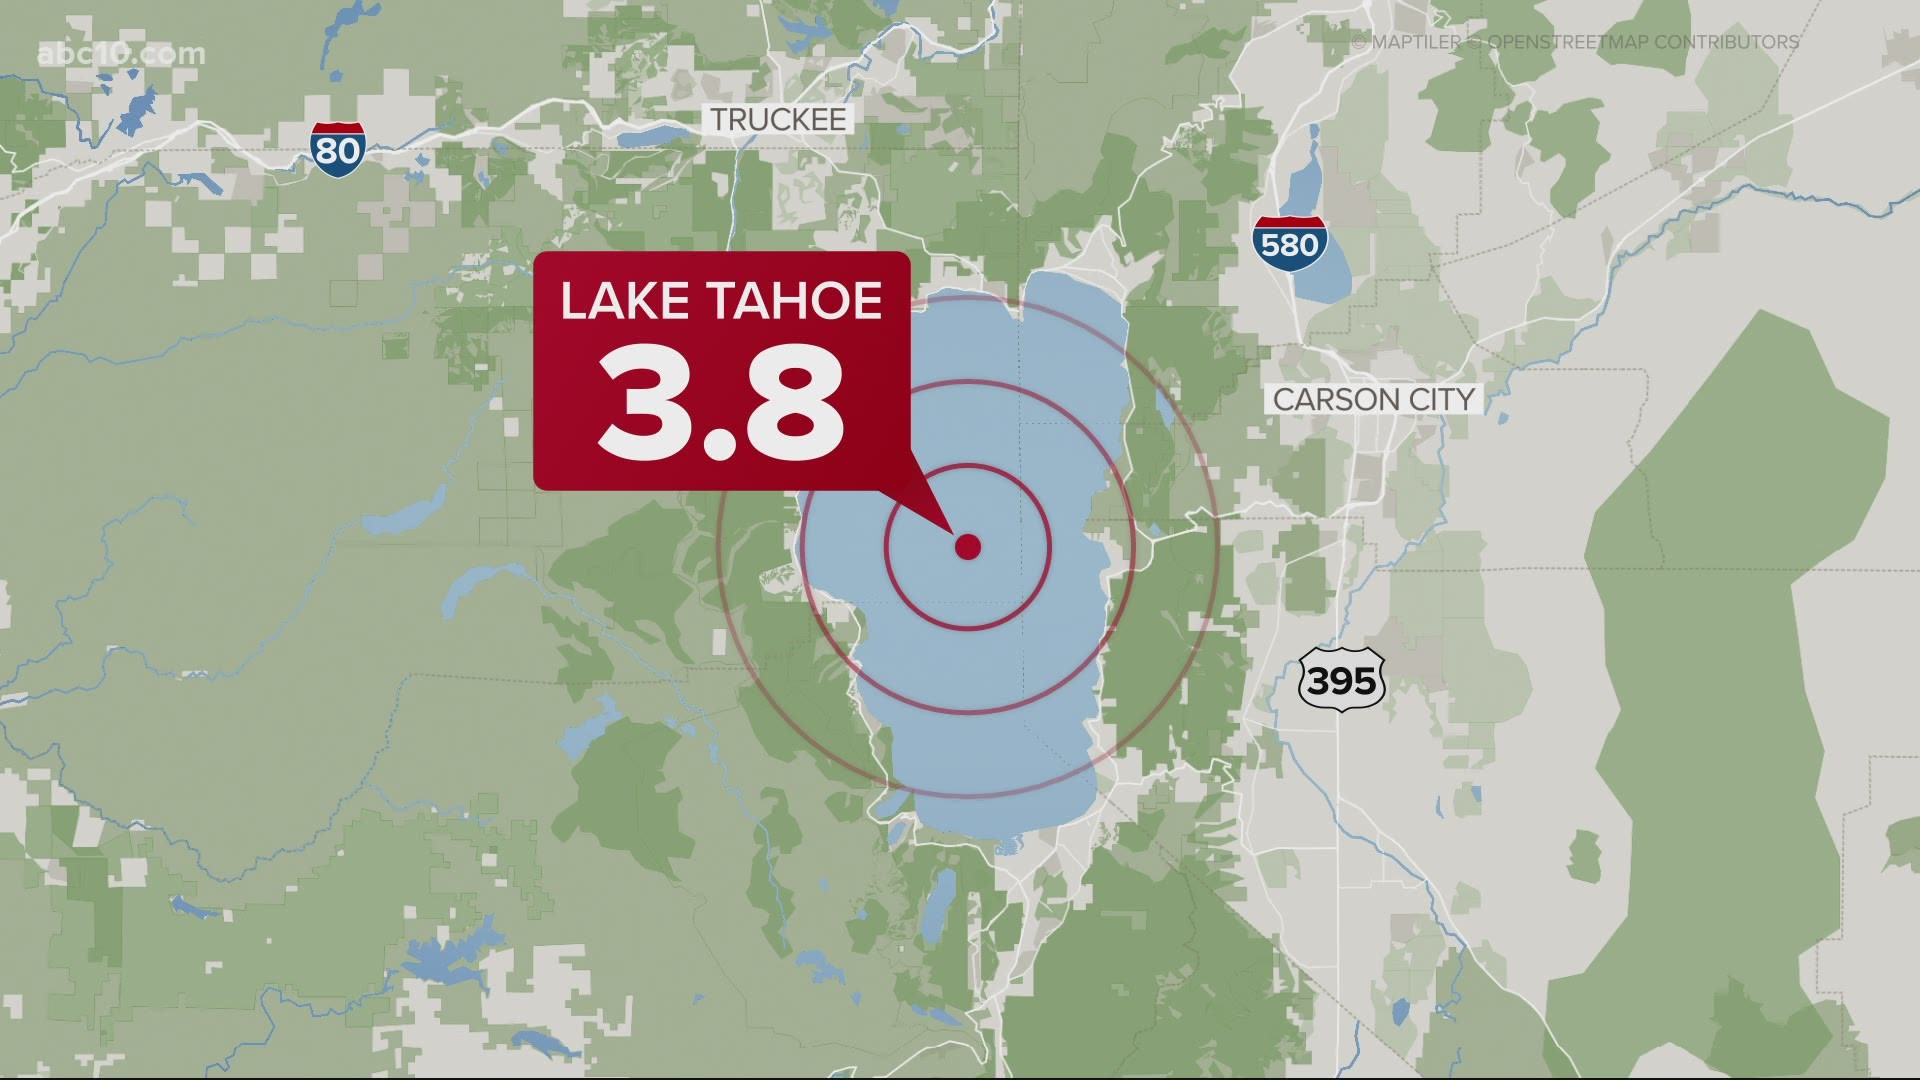 According to the USGS, the earthquake's epicenter was in the middle of Lake Tahoe, just south of Truckee.